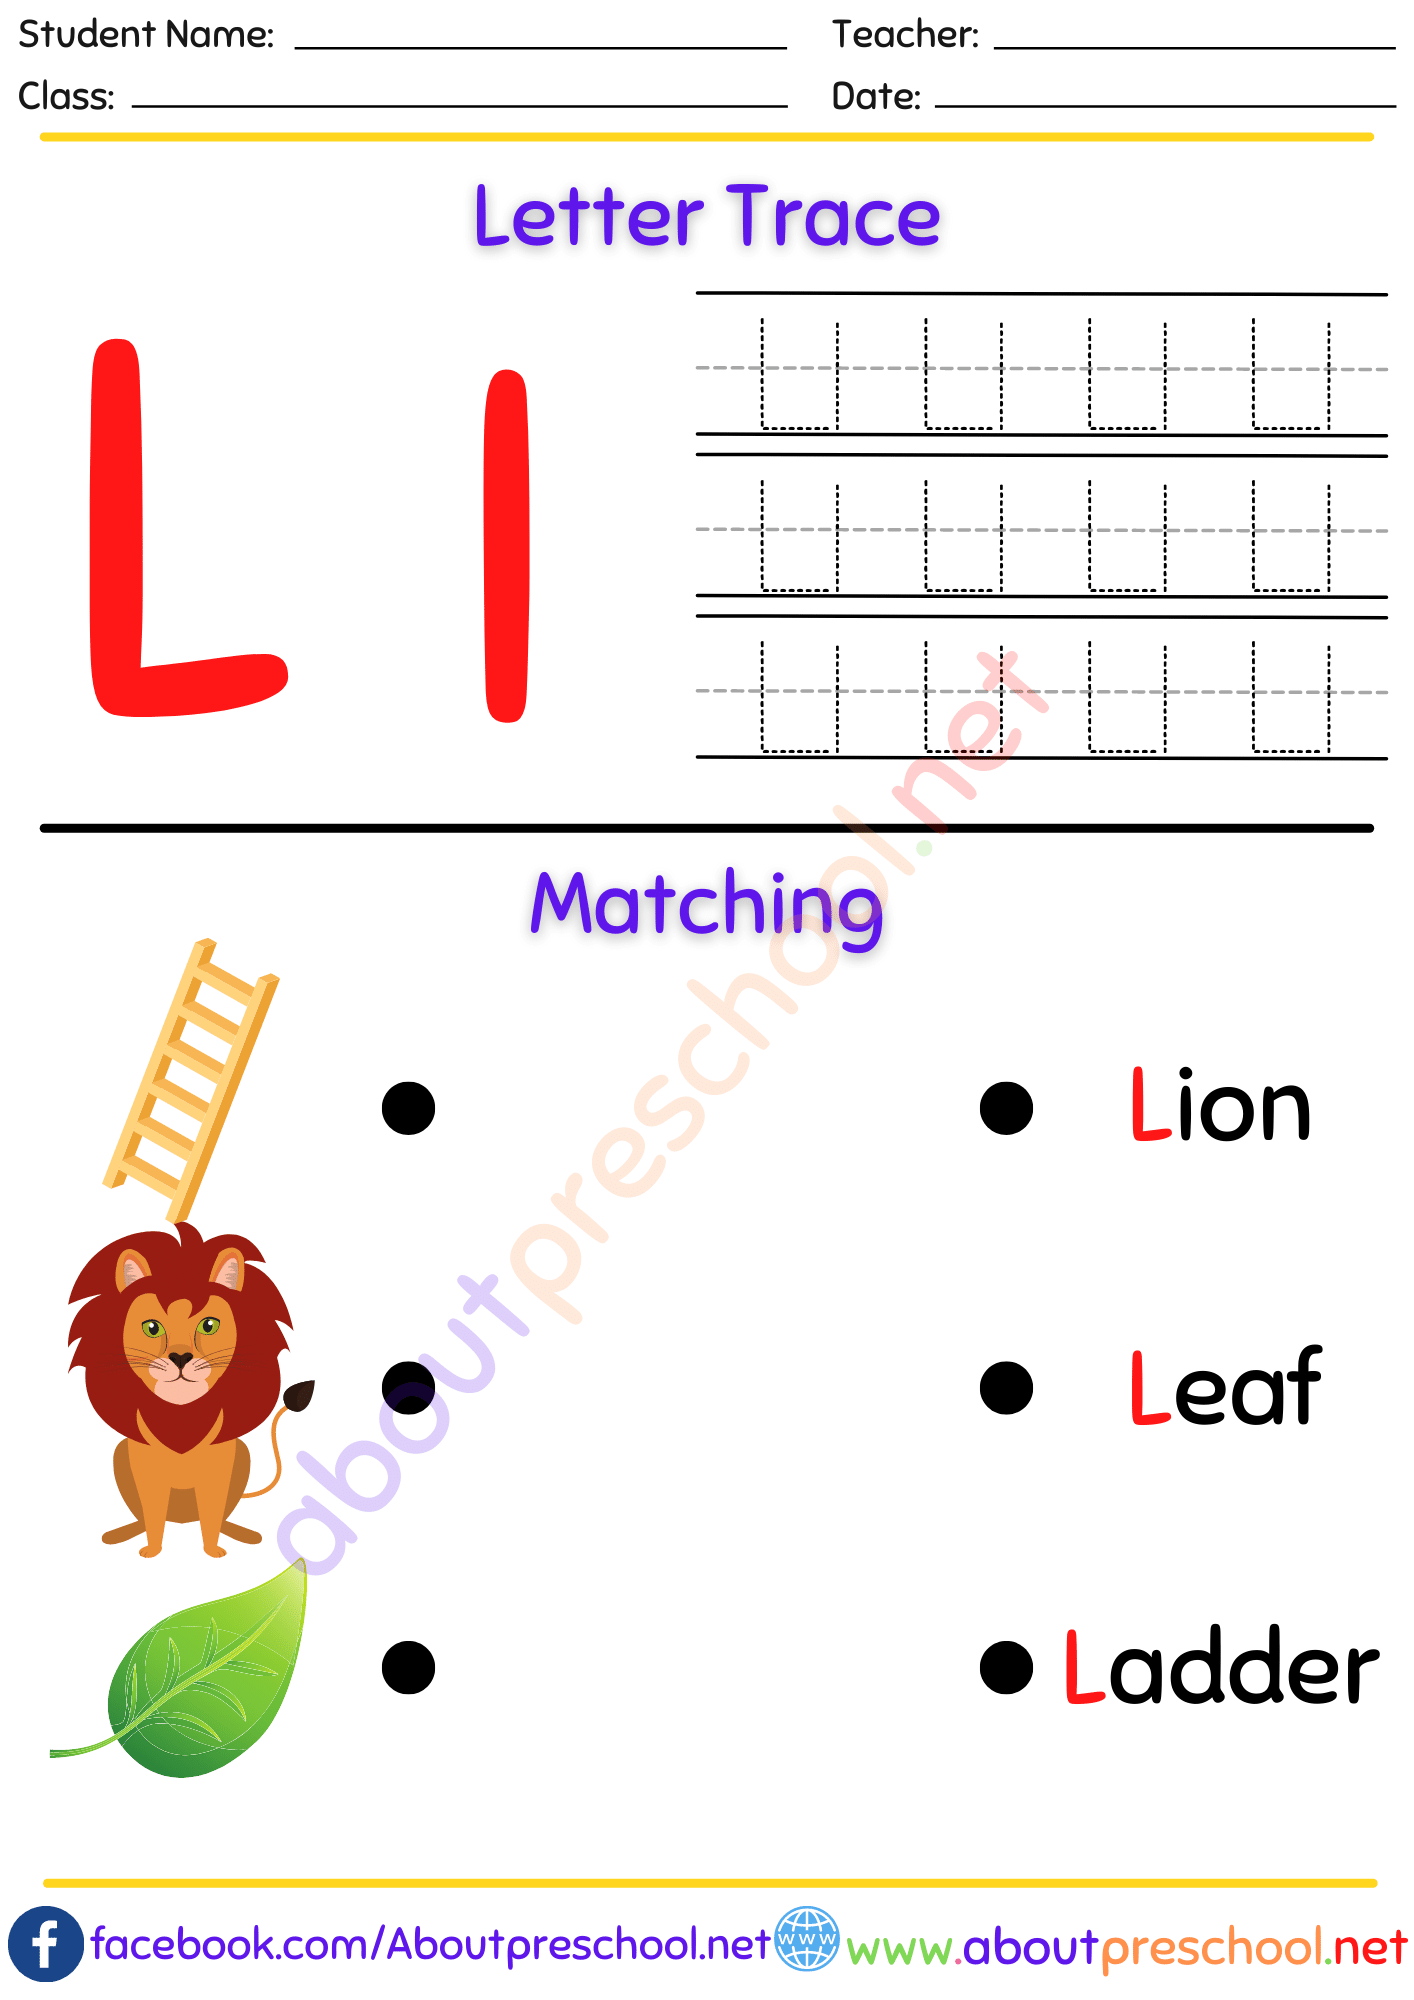 Letter Trace and Matching L